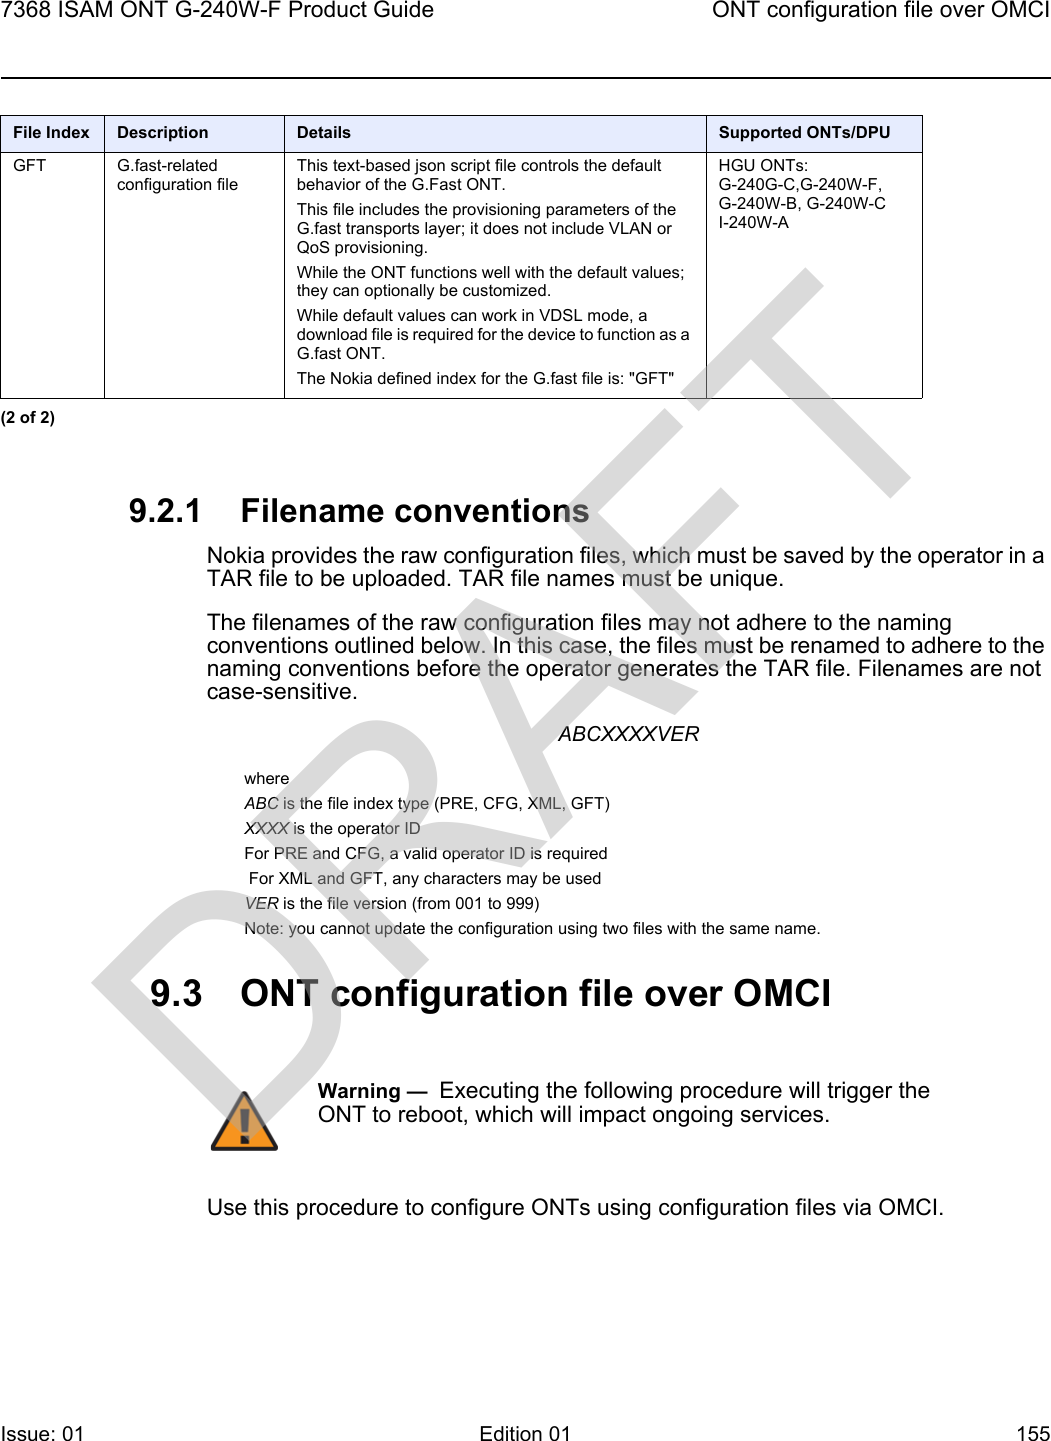 7368 ISAM ONT G-240W-F Product Guide ONT configuration file over OMCIIssue: 01 Edition 01 155 9.2.1 Filename conventionsNokia provides the raw configuration files, which must be saved by the operator in a TAR file to be uploaded. TAR file names must be unique.The filenames of the raw configuration files may not adhere to the naming conventions outlined below. In this case, the files must be renamed to adhere to the naming conventions before the operator generates the TAR file. Filenames are not case-sensitive.ABCXXXXVERwhereABC is the file index type (PRE, CFG, XML, GFT)XXXX is the operator IDFor PRE and CFG, a valid operator ID is required For XML and GFT, any characters may be usedVER is the file version (from 001 to 999) Note: you cannot update the configuration using two files with the same name.9.3 ONT configuration file over OMCIUse this procedure to configure ONTs using configuration files via OMCI.GFT G.fast-related configuration fileThis text-based json script file controls the default behavior of the G.Fast ONT. This file includes the provisioning parameters of the G.fast transports layer; it does not include VLAN or QoS provisioning. While the ONT functions well with the default values; they can optionally be customized. While default values can work in VDSL mode, a download file is required for the device to function as a G.fast ONT.The Nokia defined index for the G.fast file is: &quot;GFT&quot;HGU ONTs:G-240G-C,G-240W-F, G-240W-B, G-240W-C I-240W-AFile Index Description Details Supported ONTs/DPU(2 of 2)Warning —  Executing the following procedure will trigger the ONT to reboot, which will impact ongoing services.DRAFT